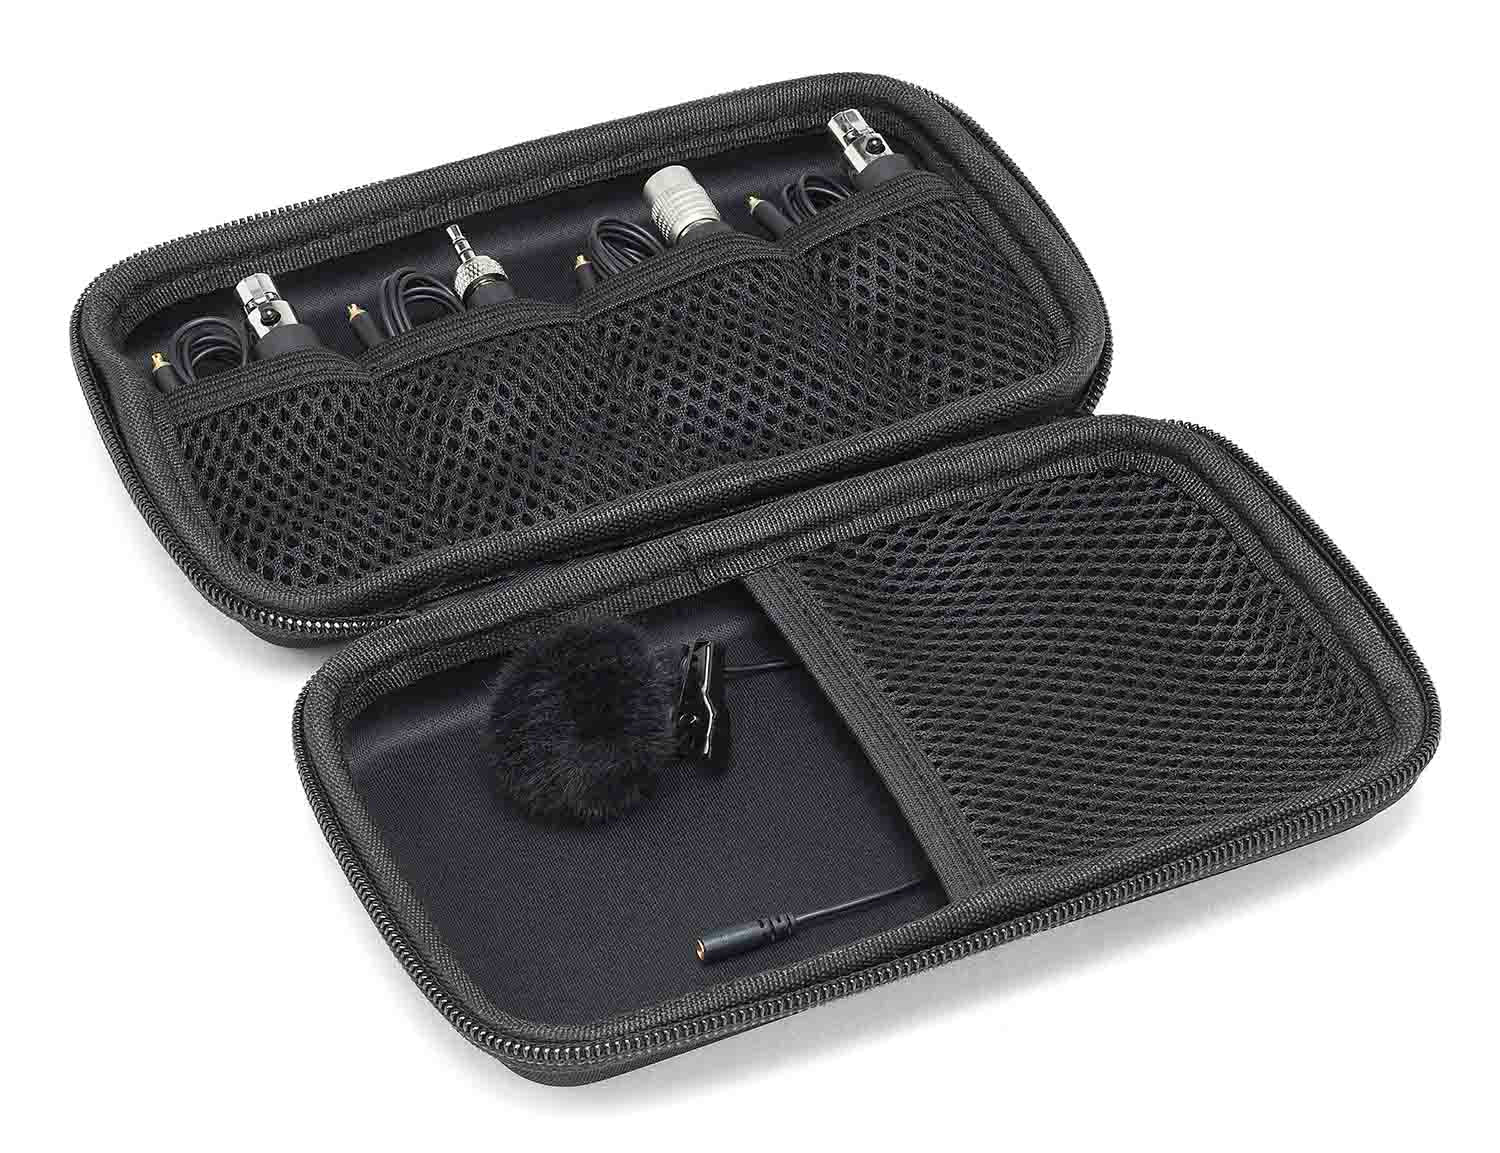 Samson LM7X Unidirectional Lavalier Microphone for Wireless Transmitters - Hollywood DJ